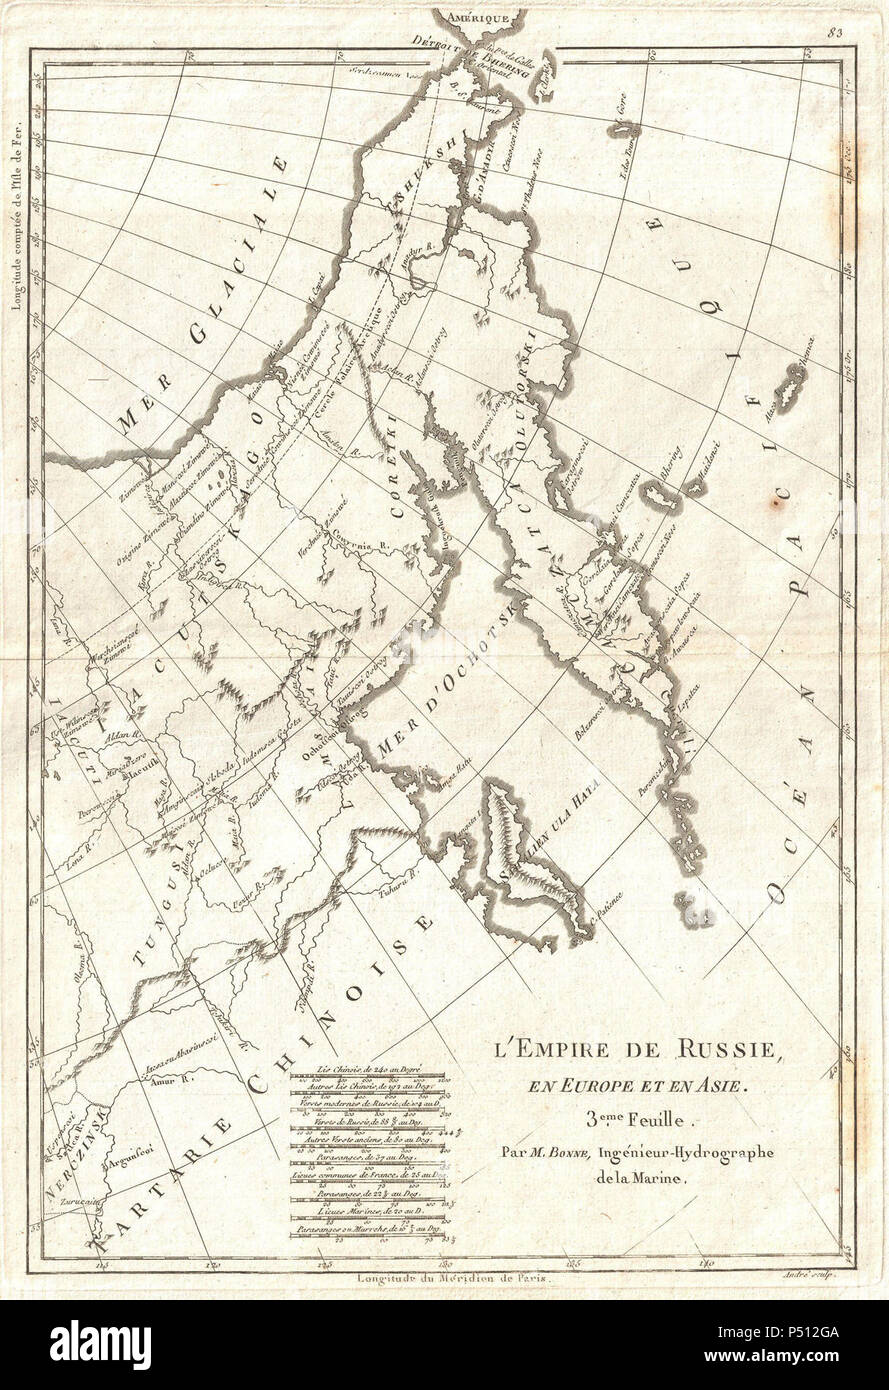 1780 Bellin Map of Eastern Russia, Tartary, and the Bering Strait - Geographicus - EmpireRussie3-bonne-1780. Stock Photo